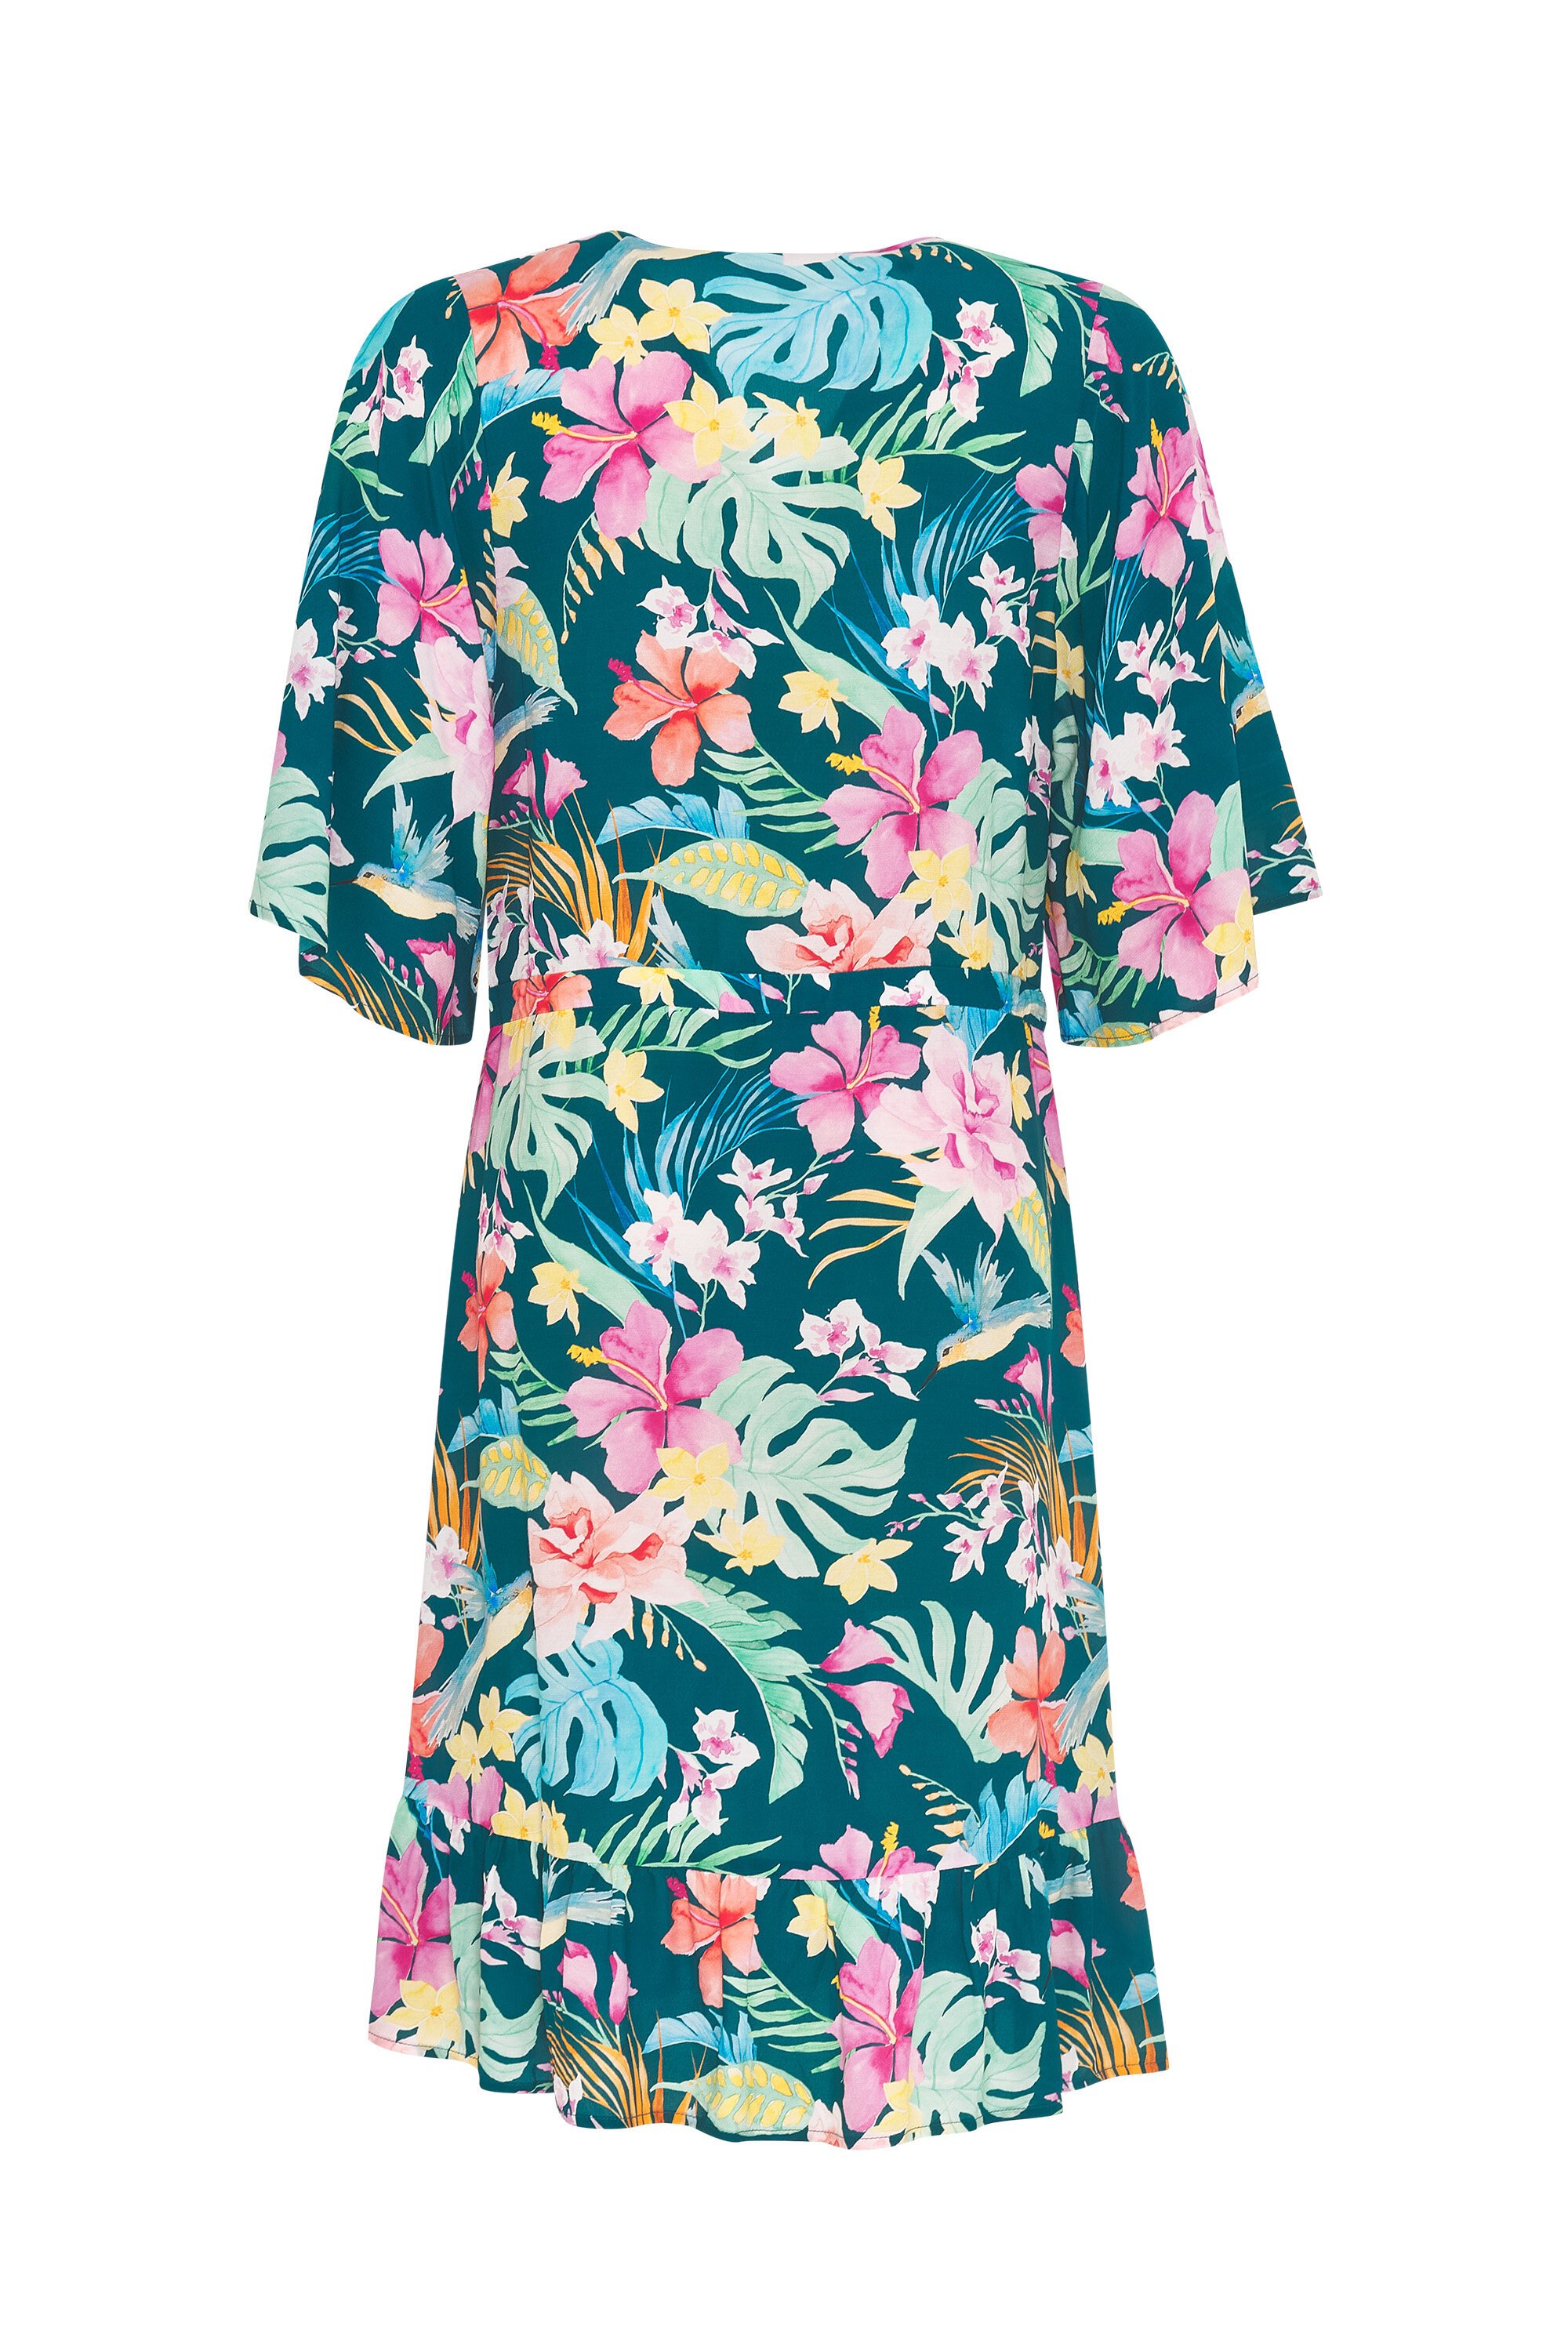 Madly Sweetly FREE AS A BIRD DRESS - Brand-Madly Sweetly : Diahann ...